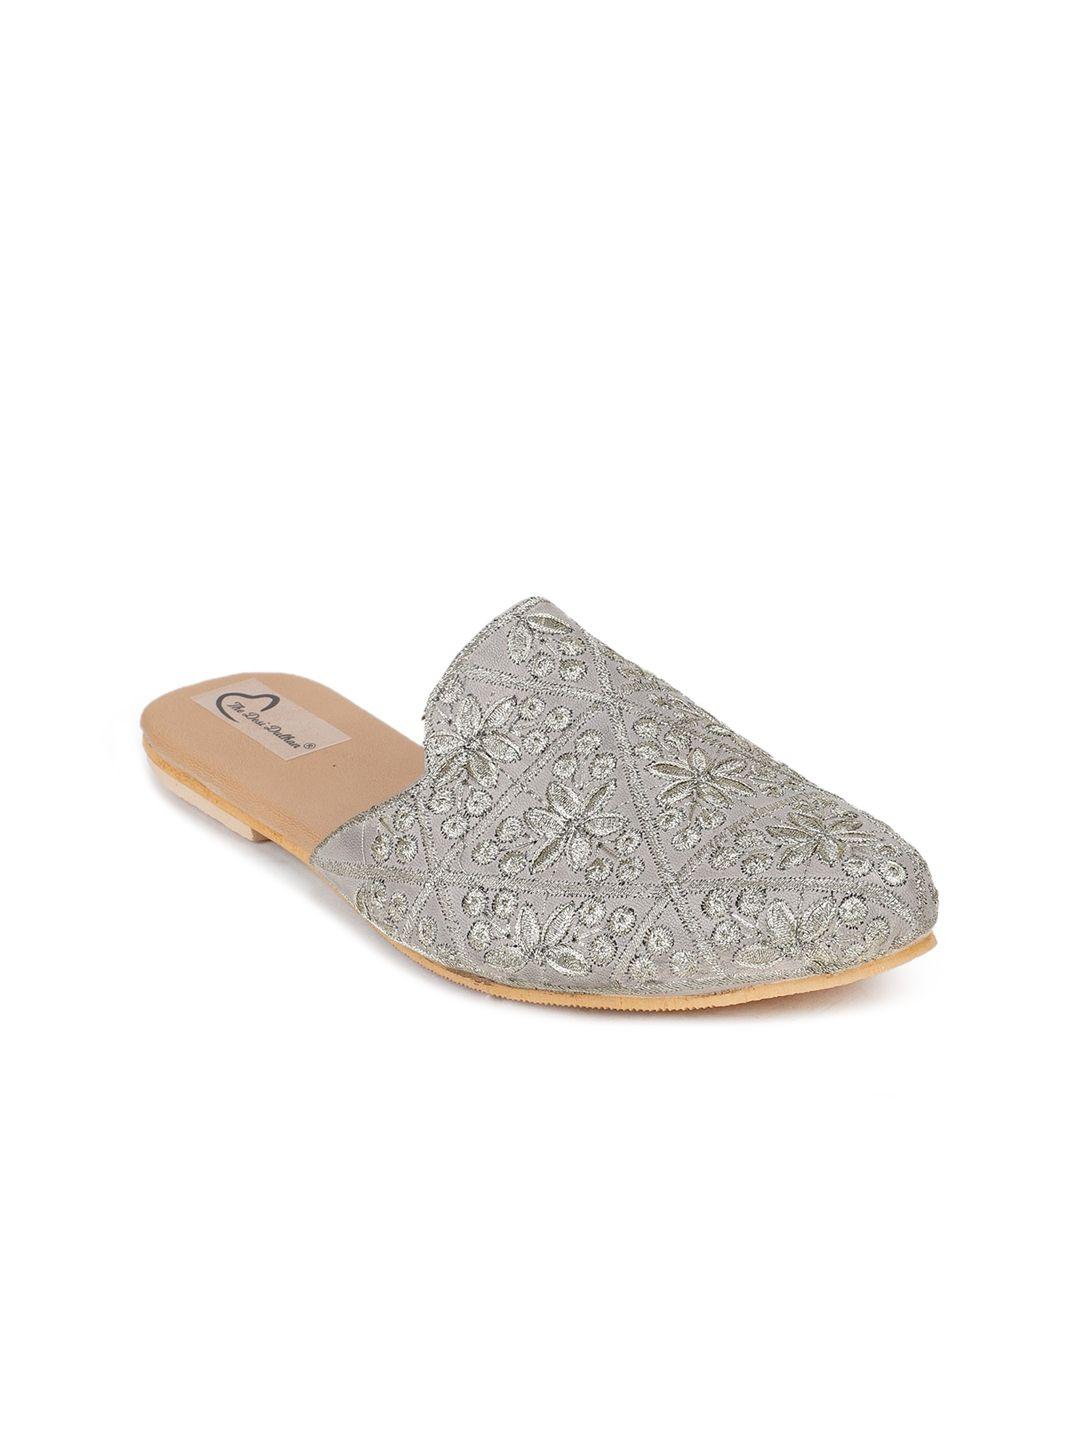 the desi dulhan women grey textured leather ethnic flats